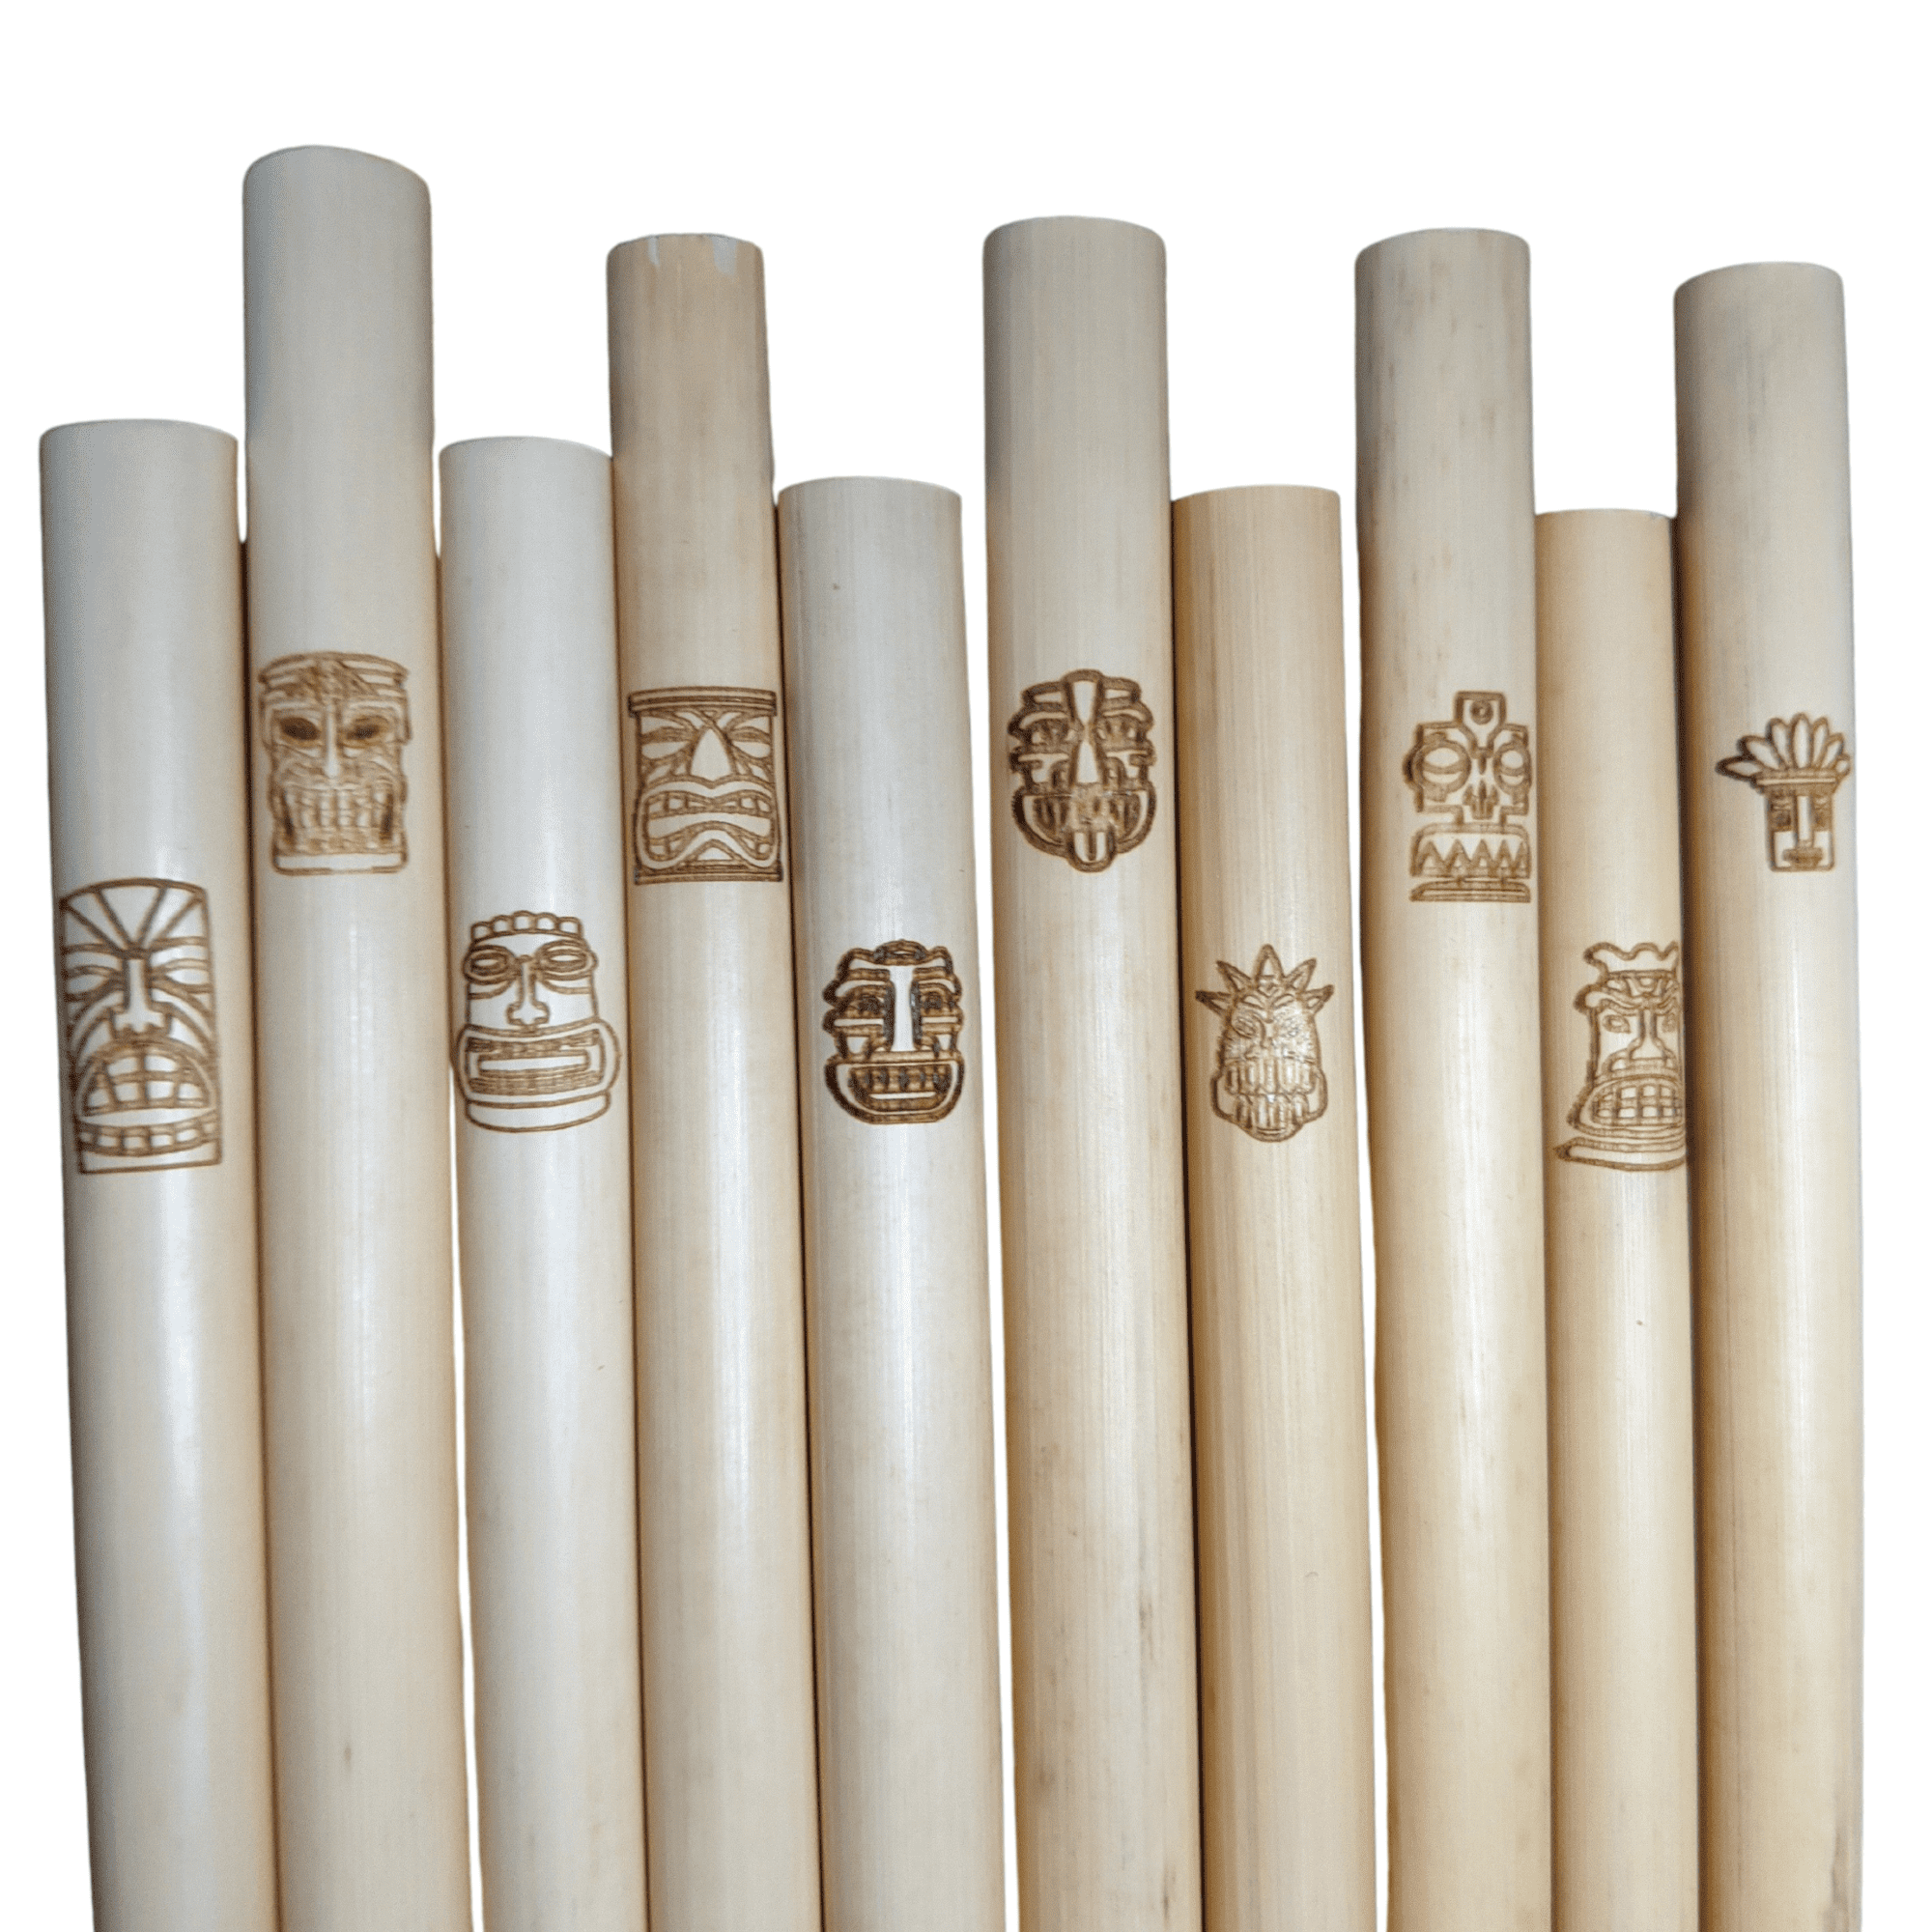 Holy City Straw Company Tiki Collector Series Branded Reed Straws 10 pack staggered straws with mask branding